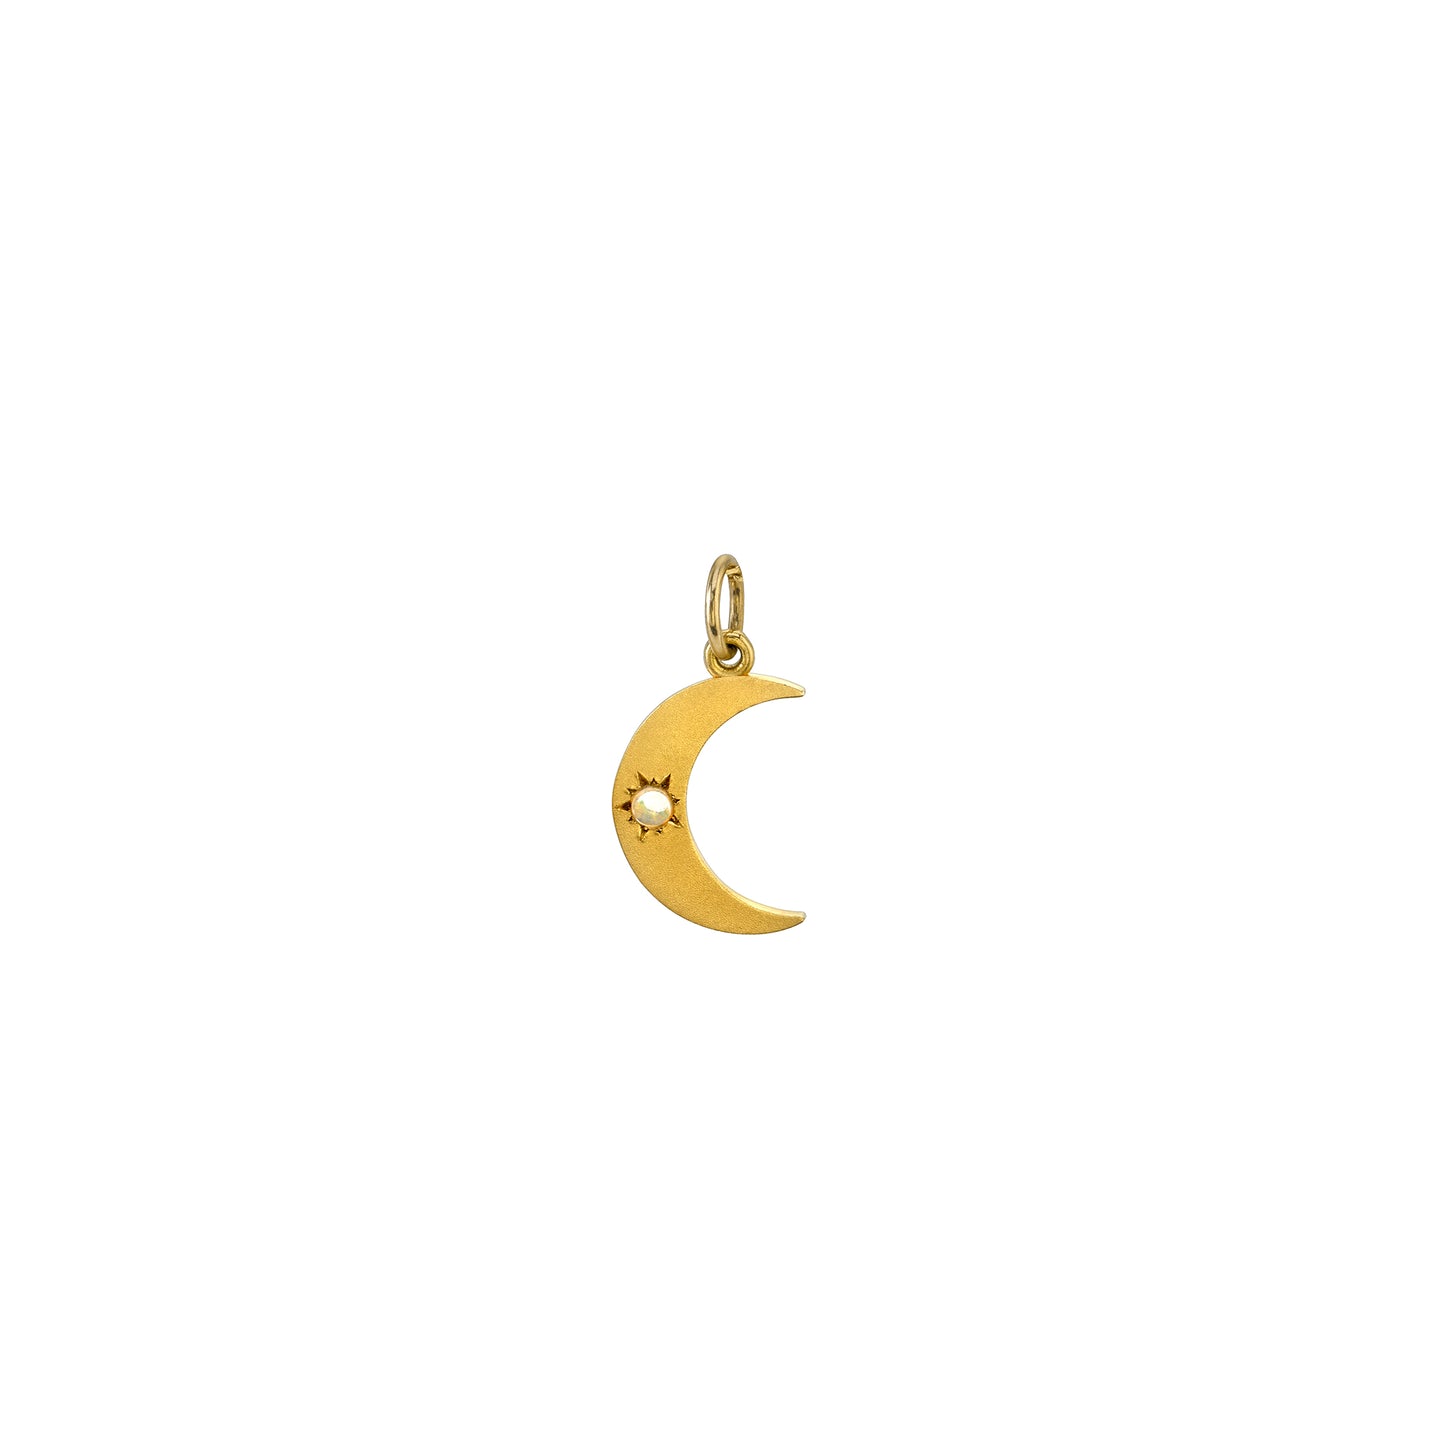 Small Crescent Moon Phase Single Opal Charm